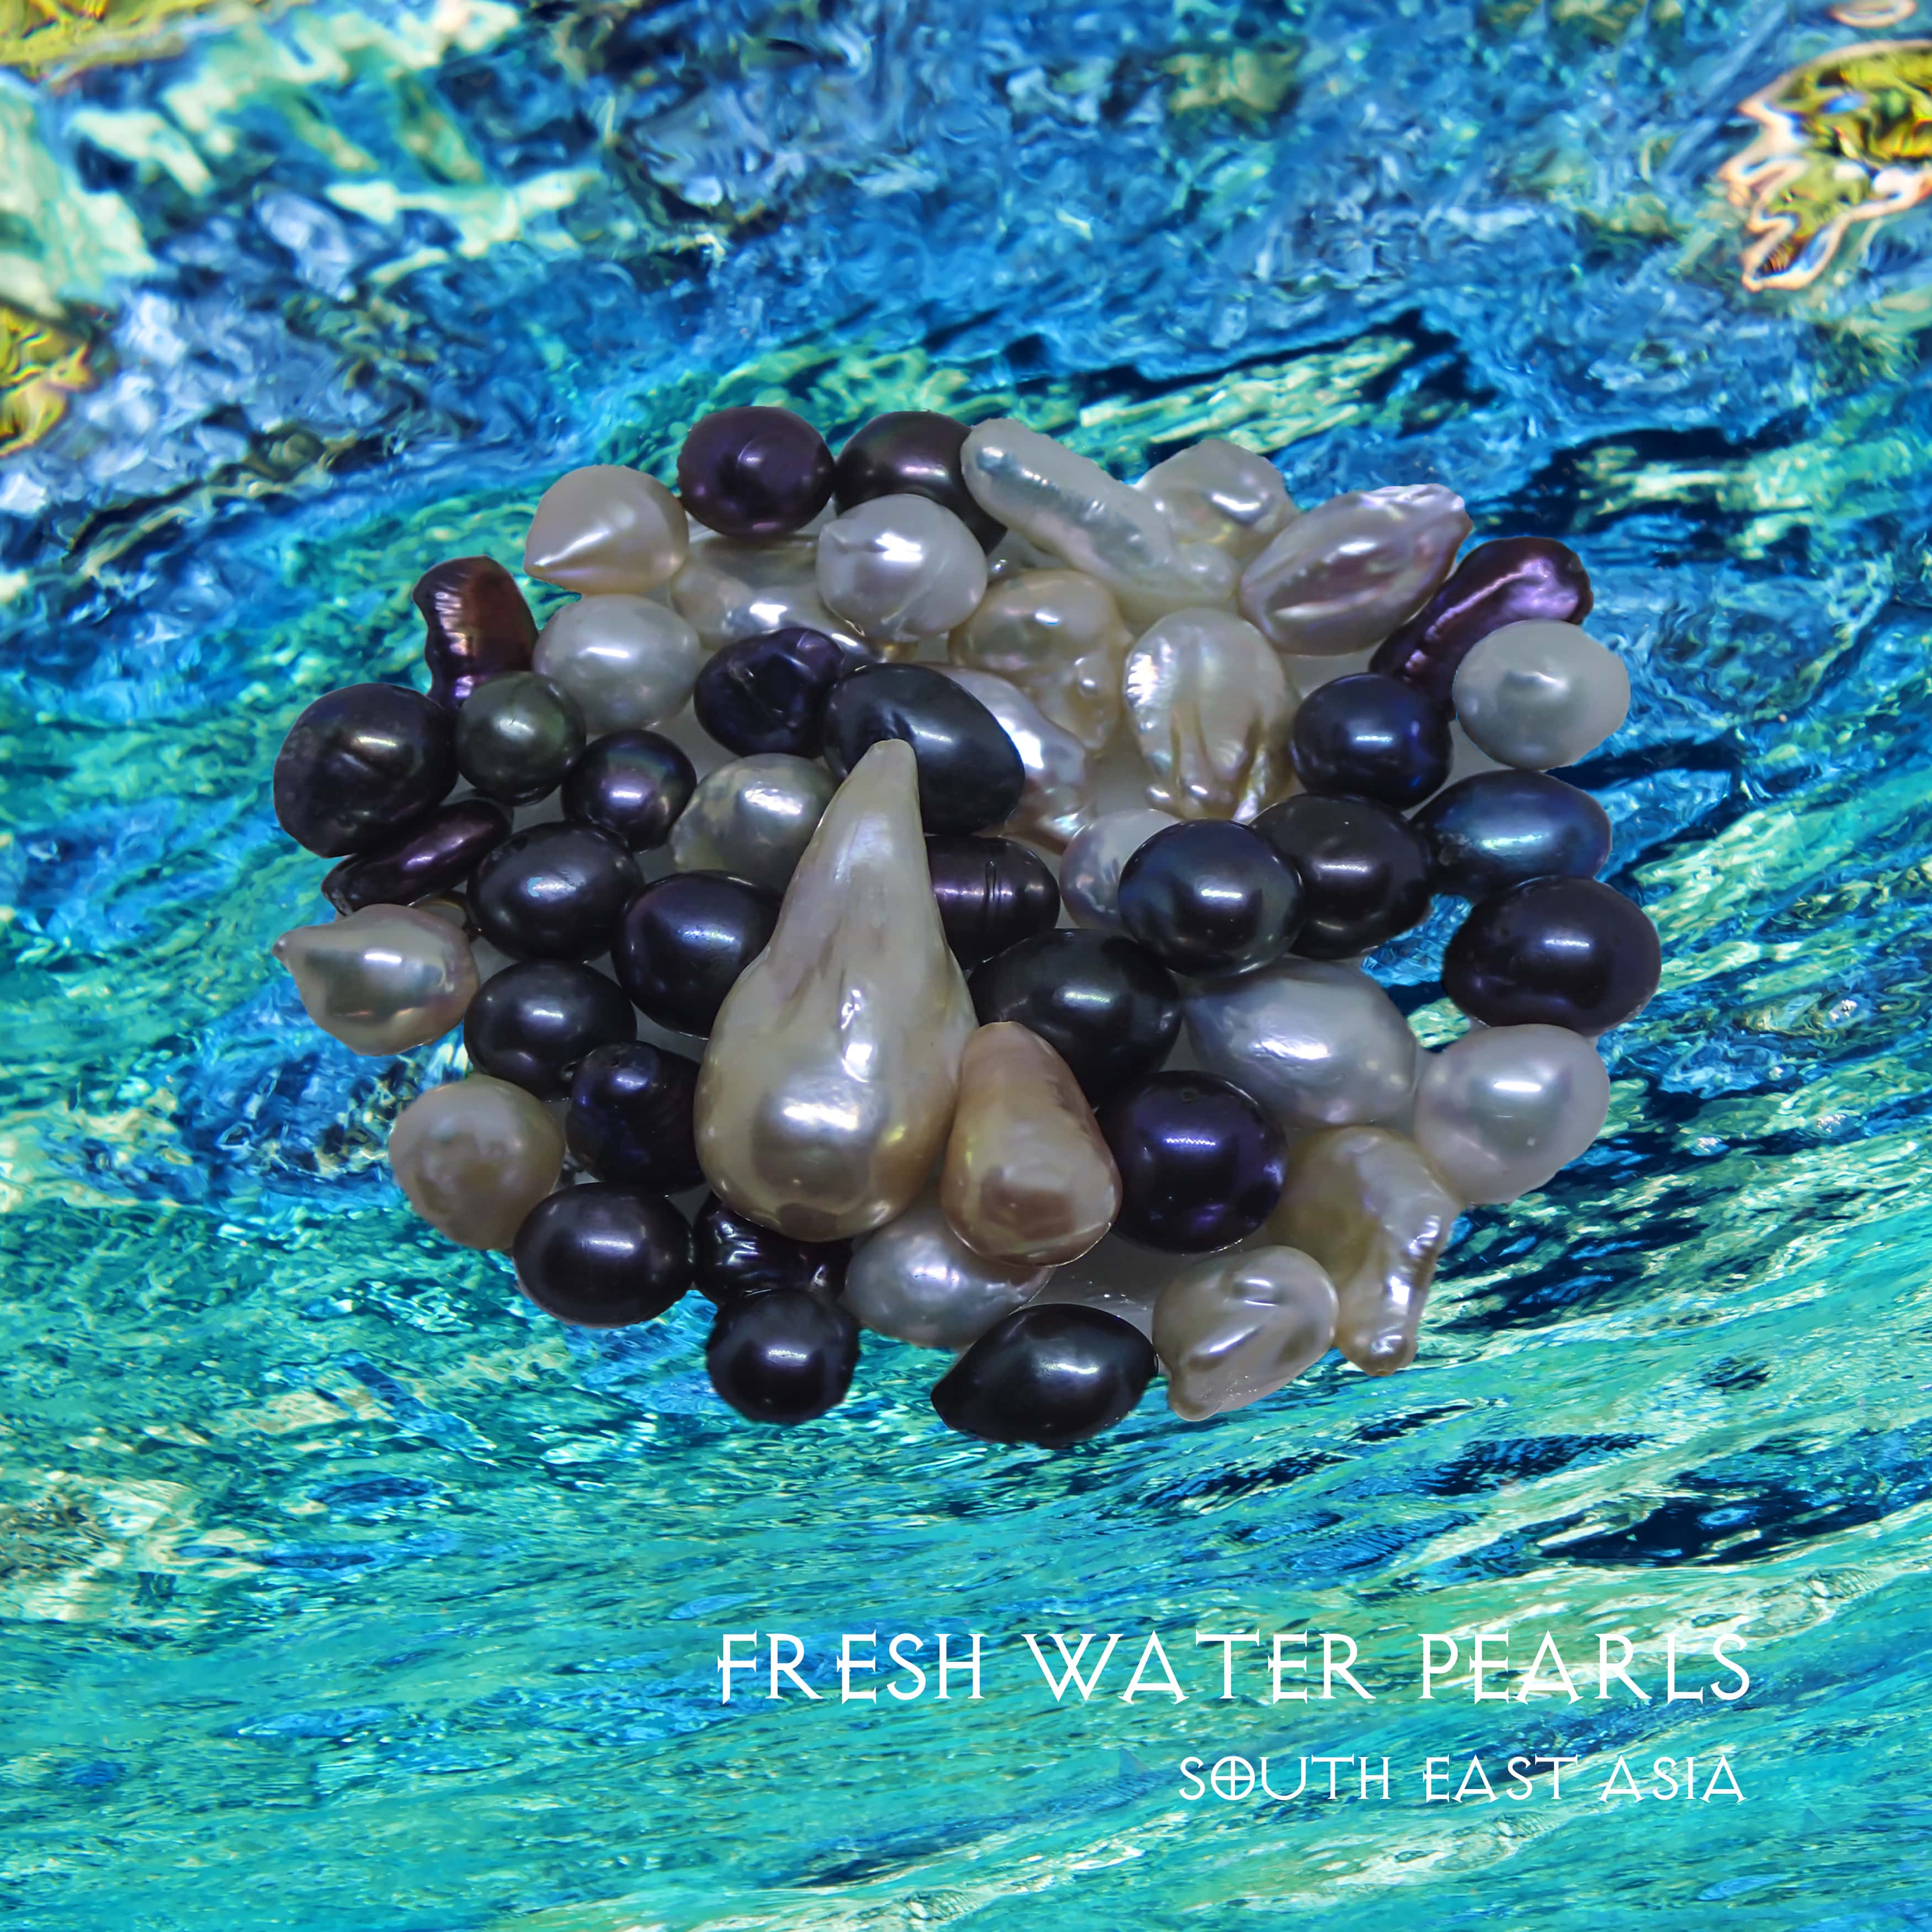 Picture of Fresh Water Pearls for this category of pearls